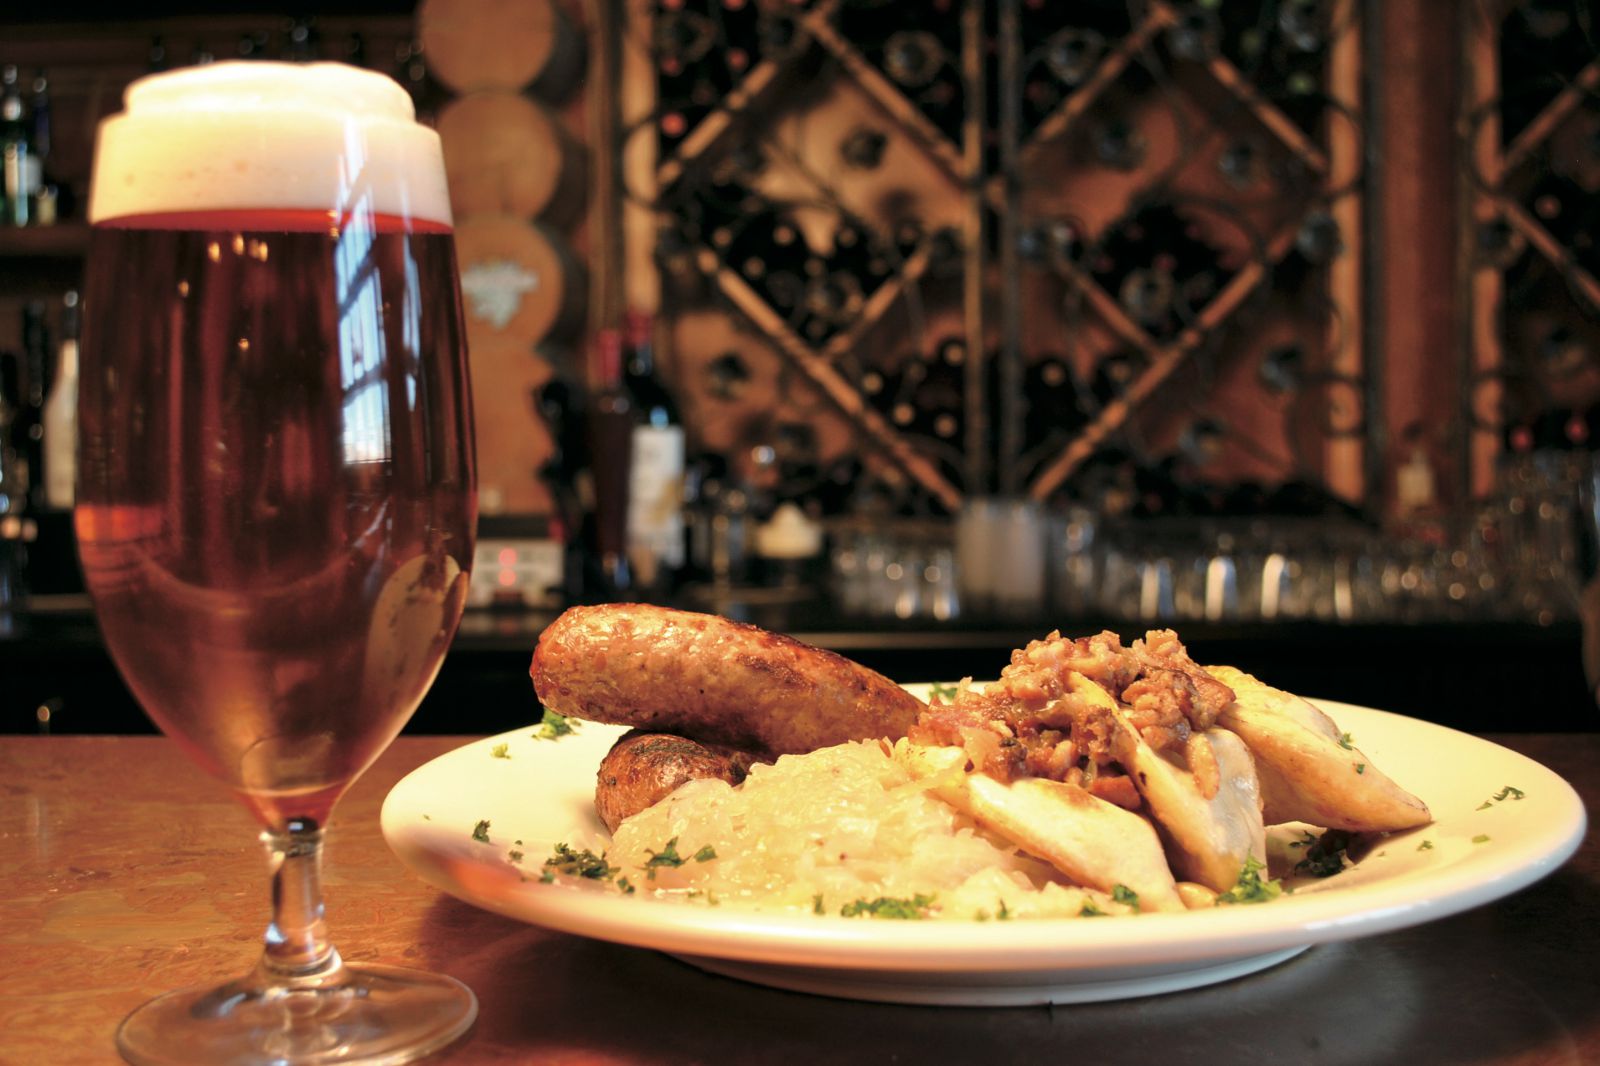 Food and beer pairings are quickly becoming all the rage.